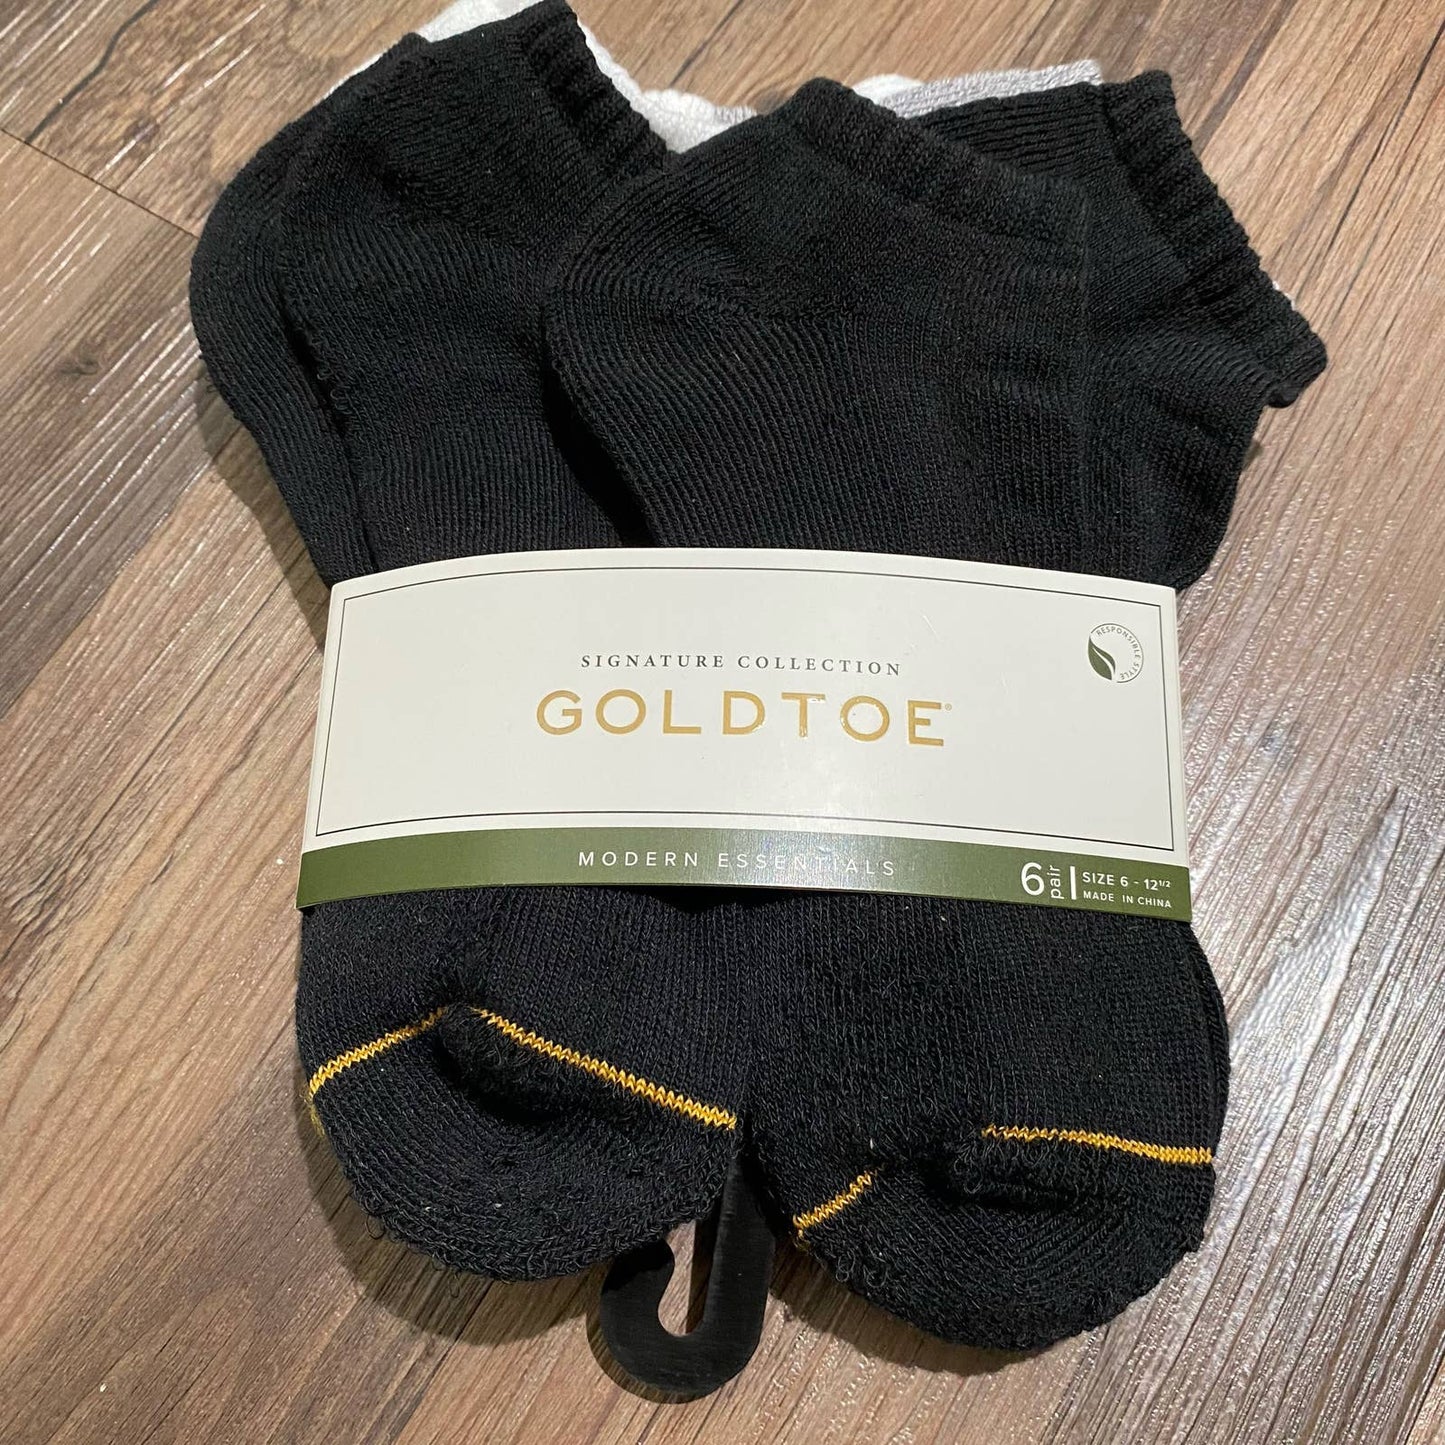 Gold Toe 6 pair Signature Collection sz 6-12.5 ankle socks